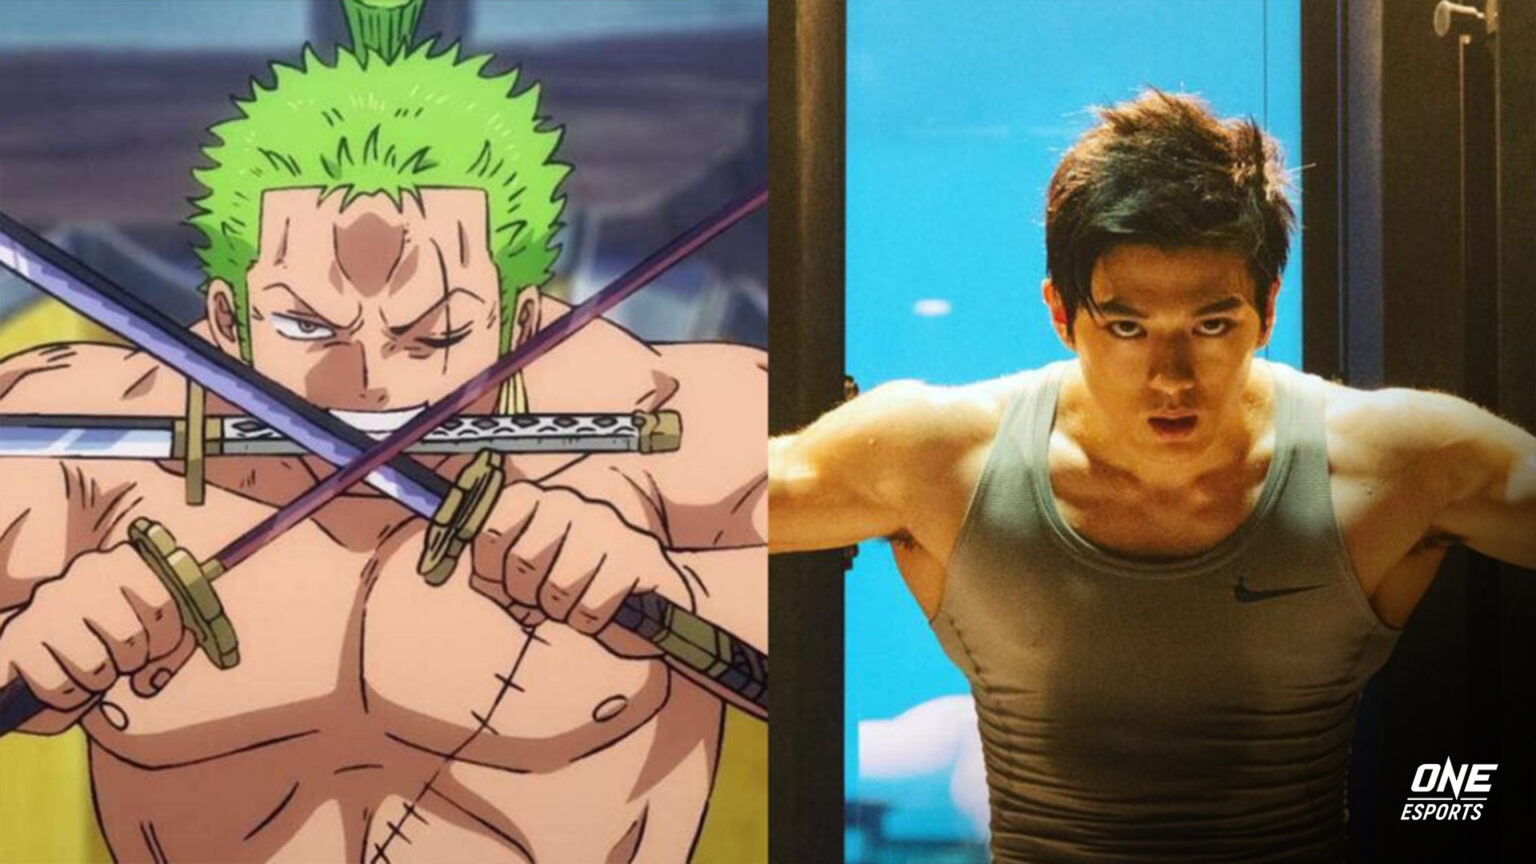 Netflix's One Piece live-action: Cast, trailer, release date | ONE Esports